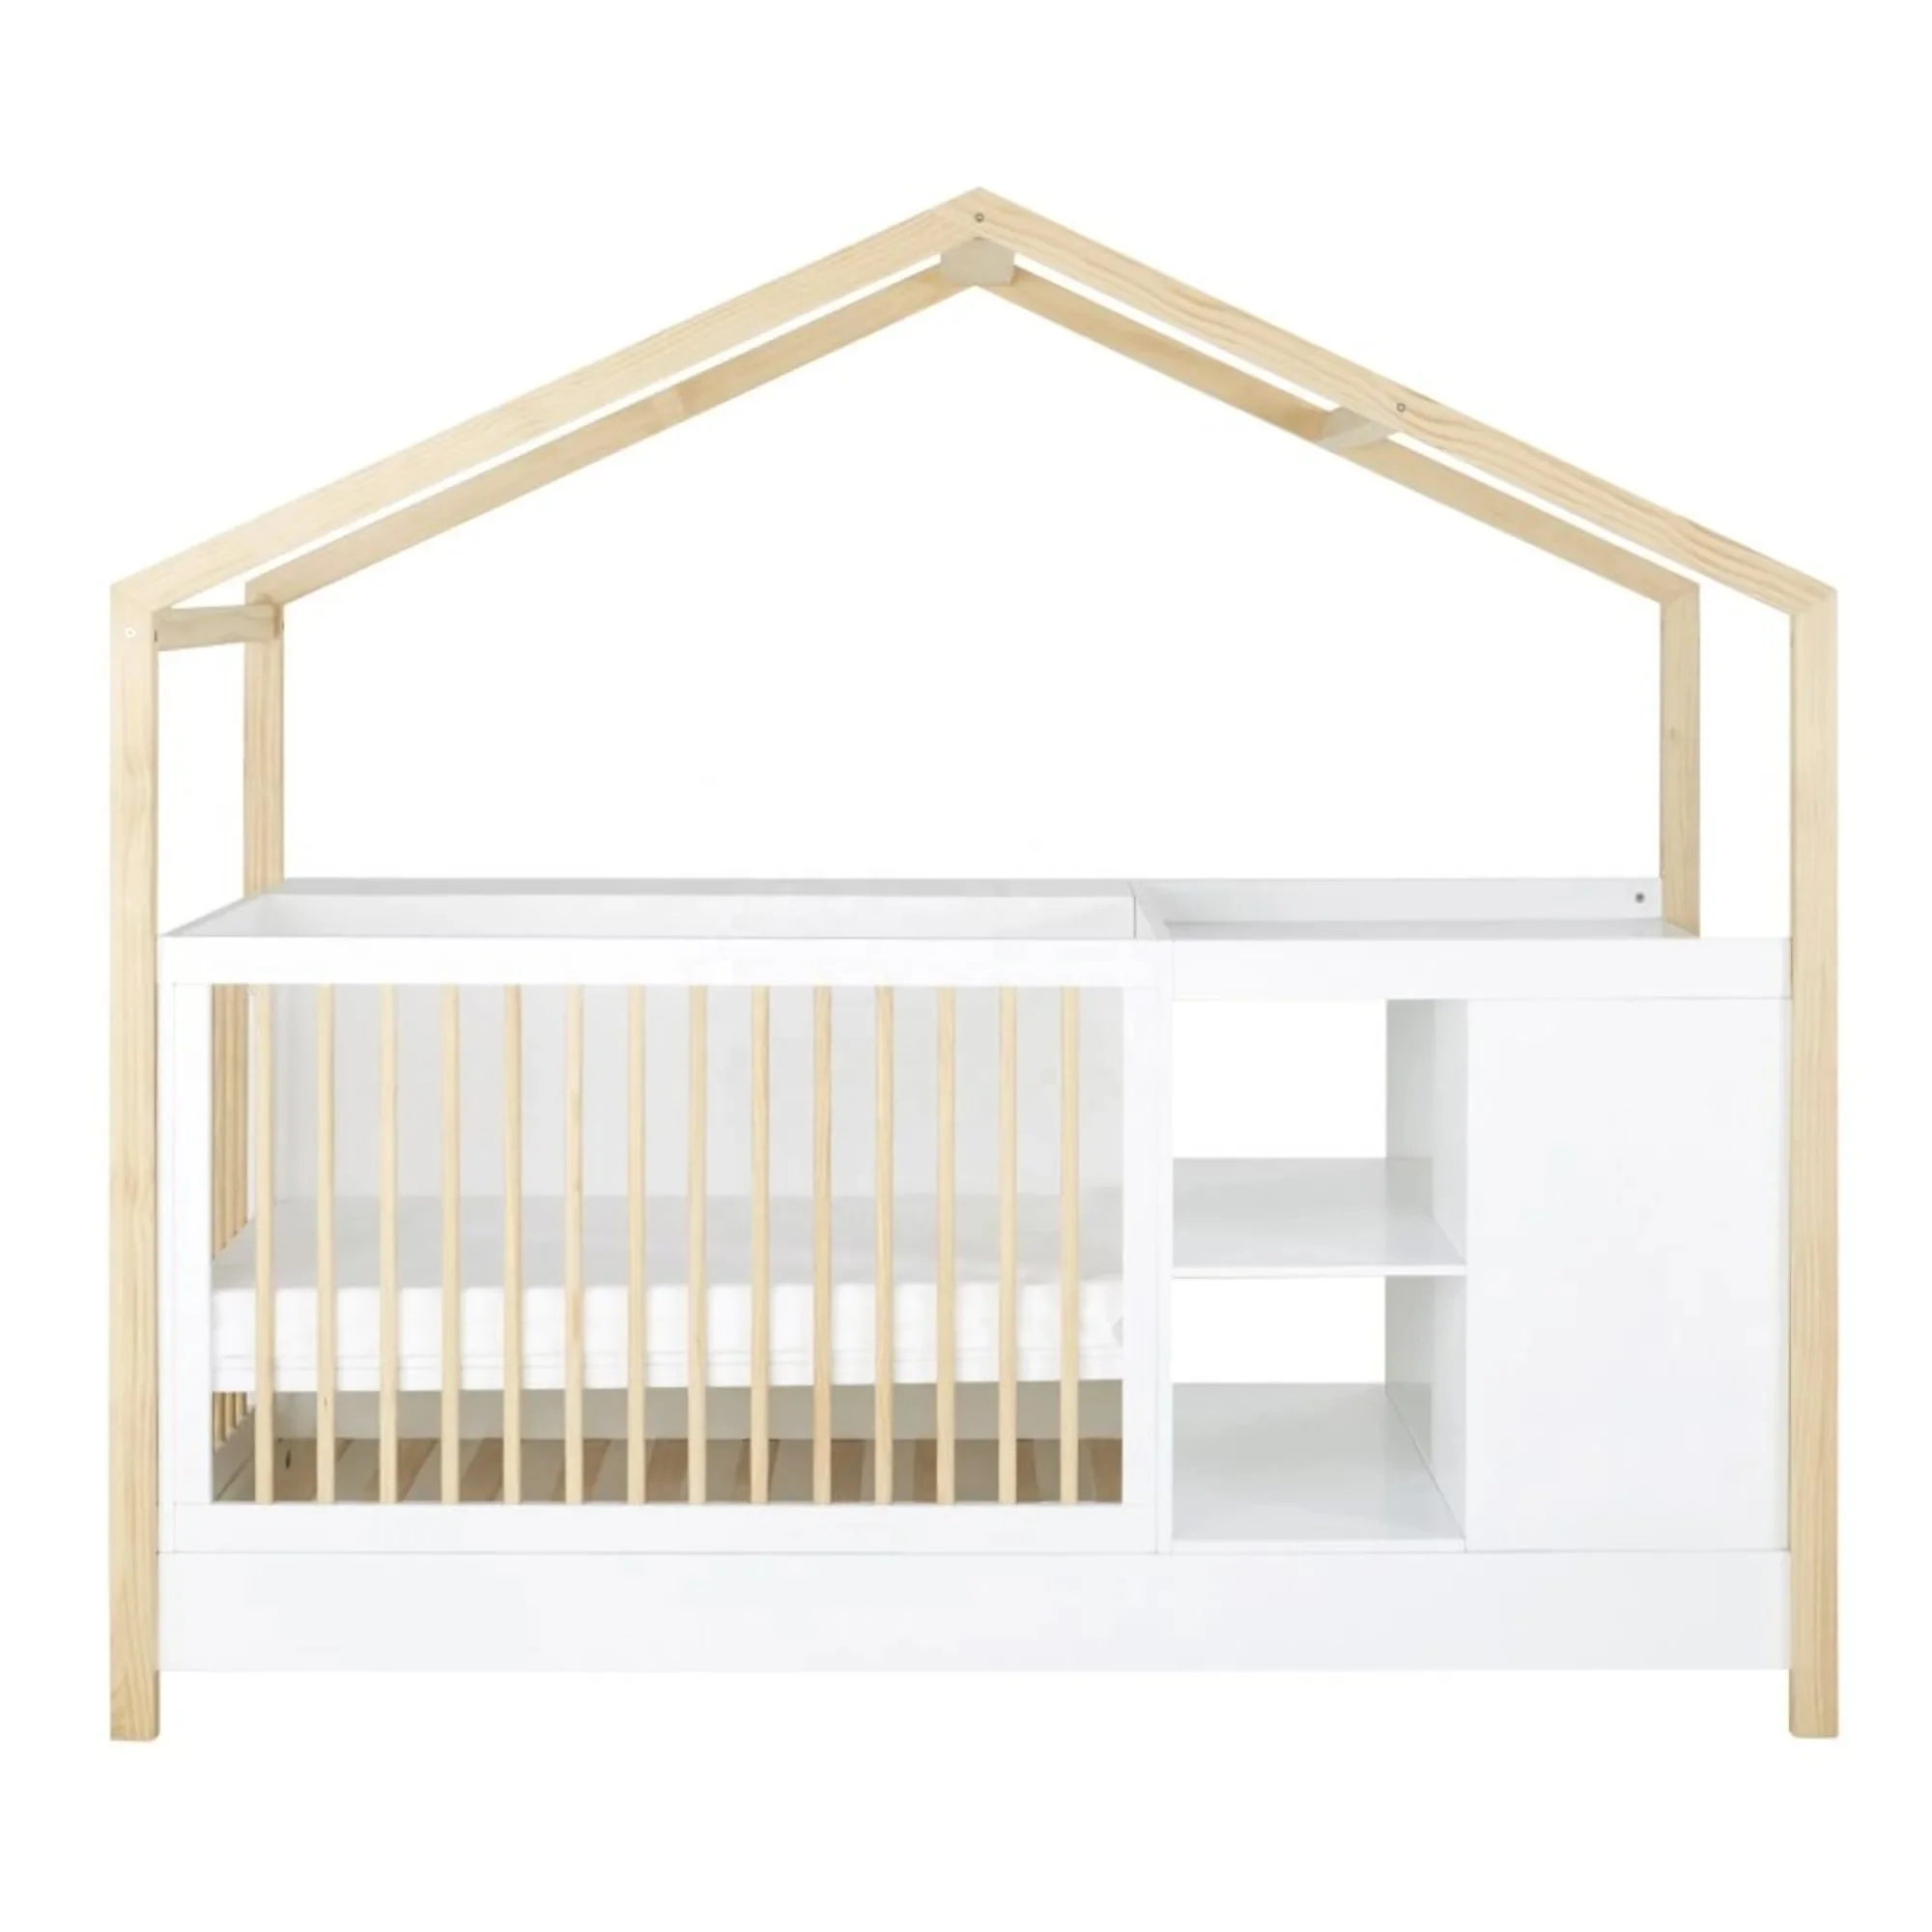 22NVCB014 House Shape Toddler Bed 2 in Multifunction Baby Crib Bed Wooden Baby Crib Set  Kids Storage Cabinet